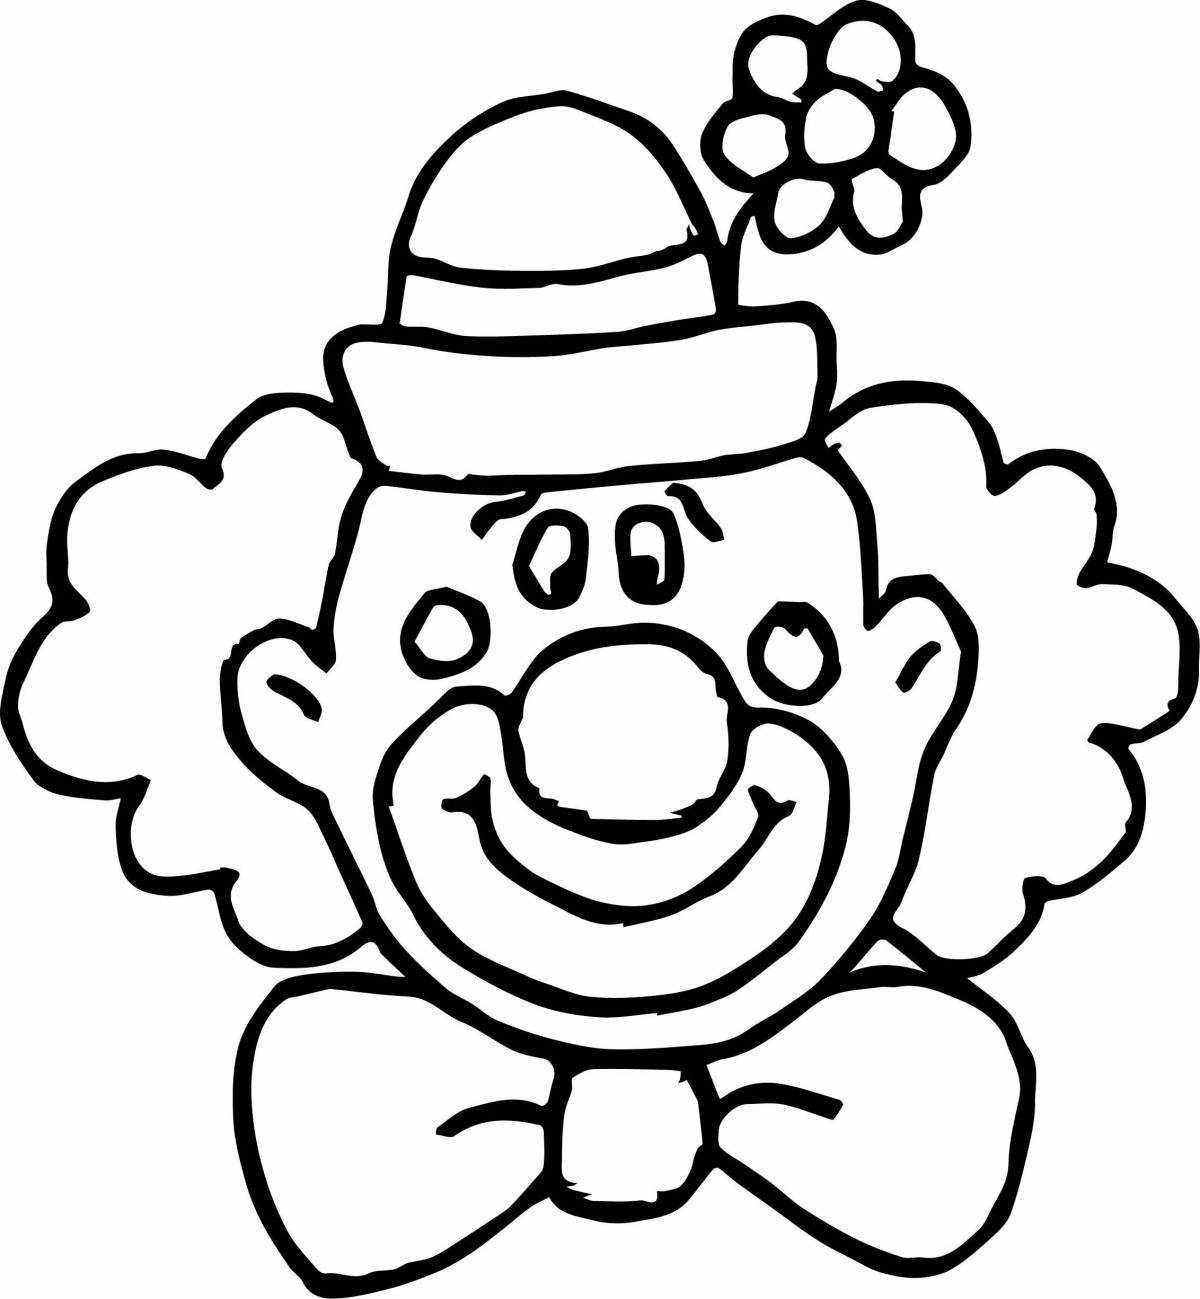 Outstanding clown face coloring page for kids